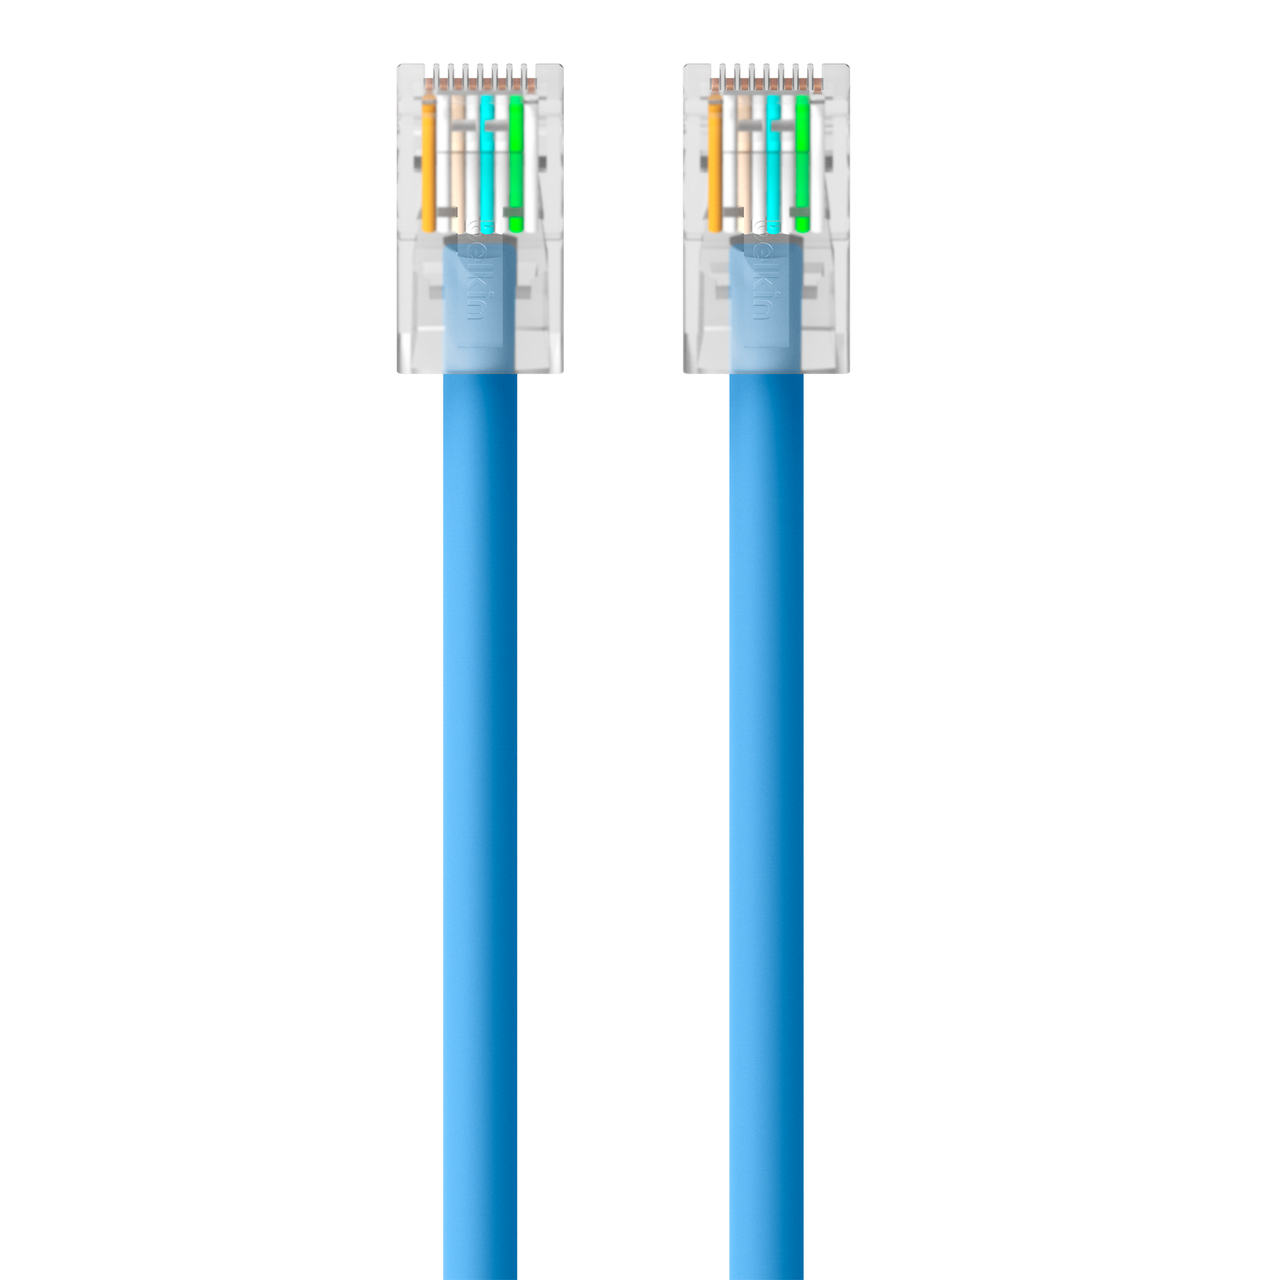 Cable rj45 cat 9 - Cdiscount